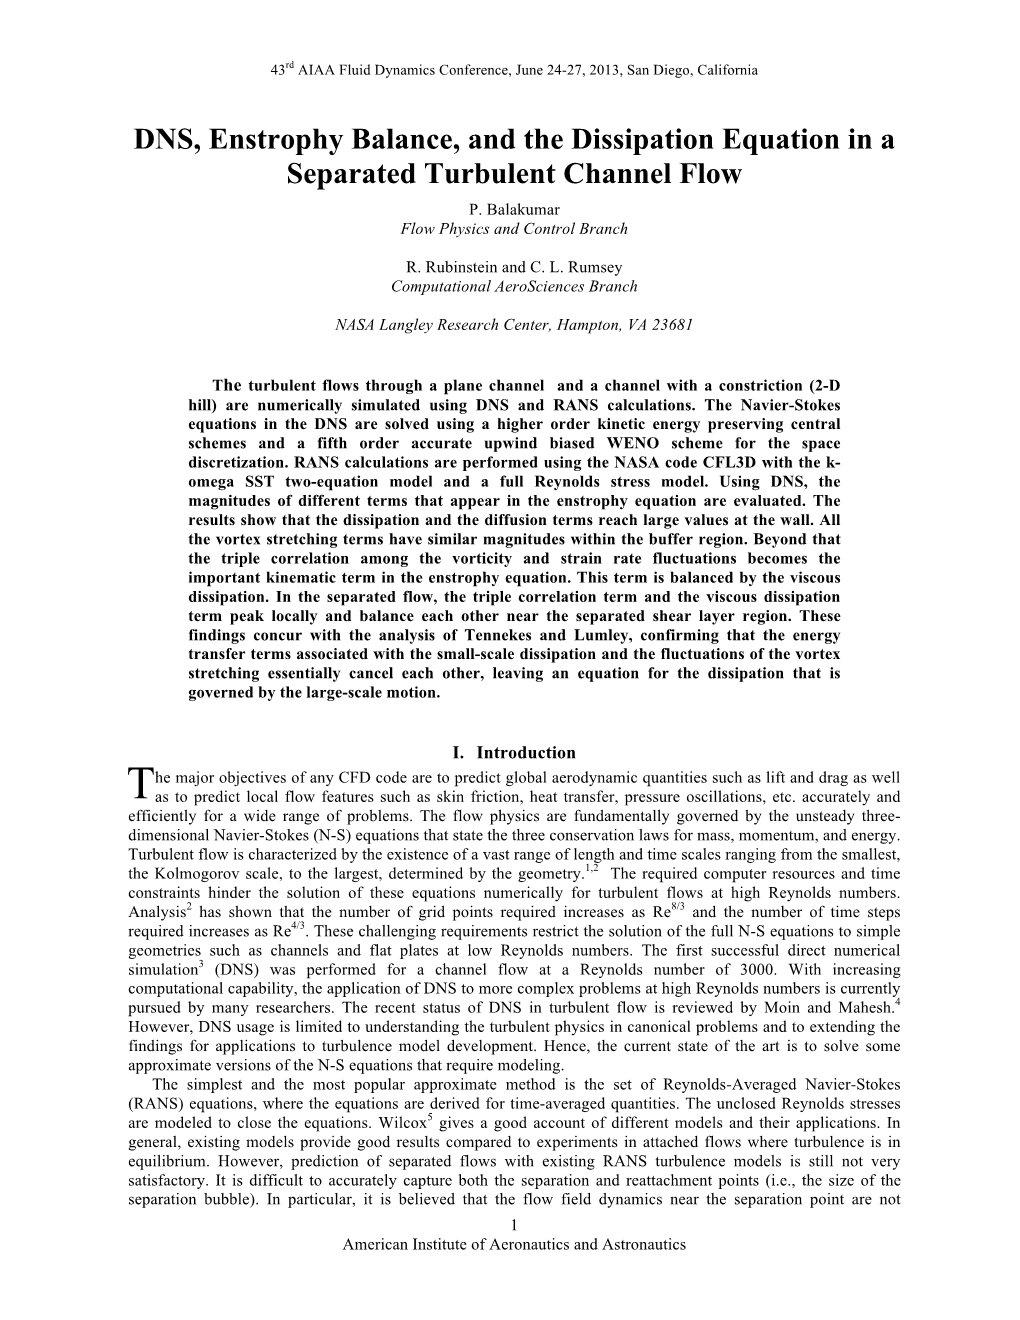 DNS, Enstrophy Balance, and the Dissipation Equation in a Separated Turbulent Channel Flow P